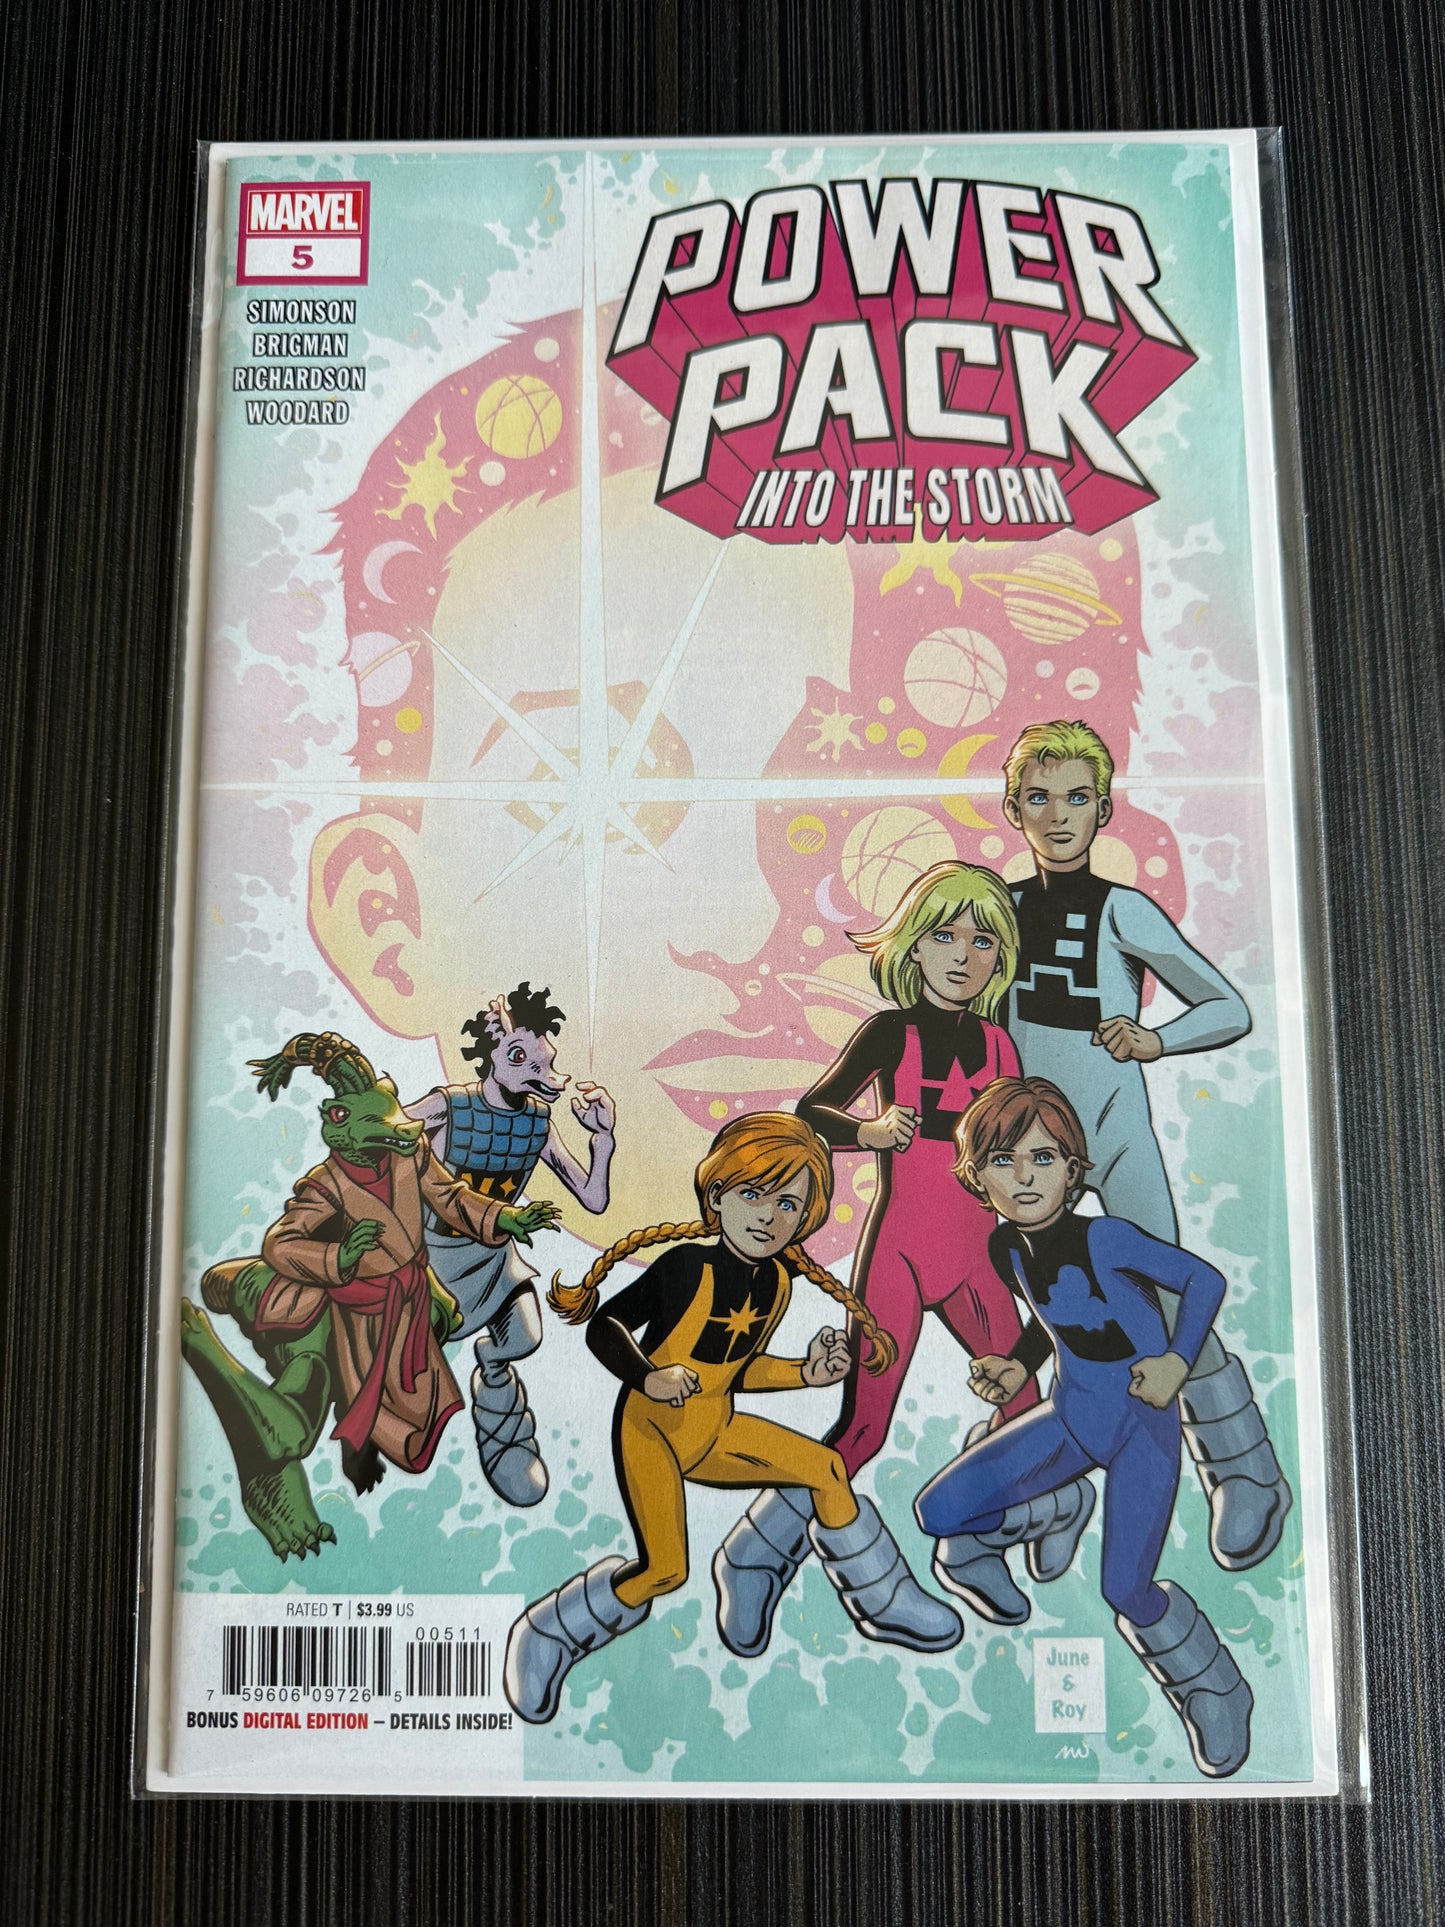 Power Pack: Into The Storm #5